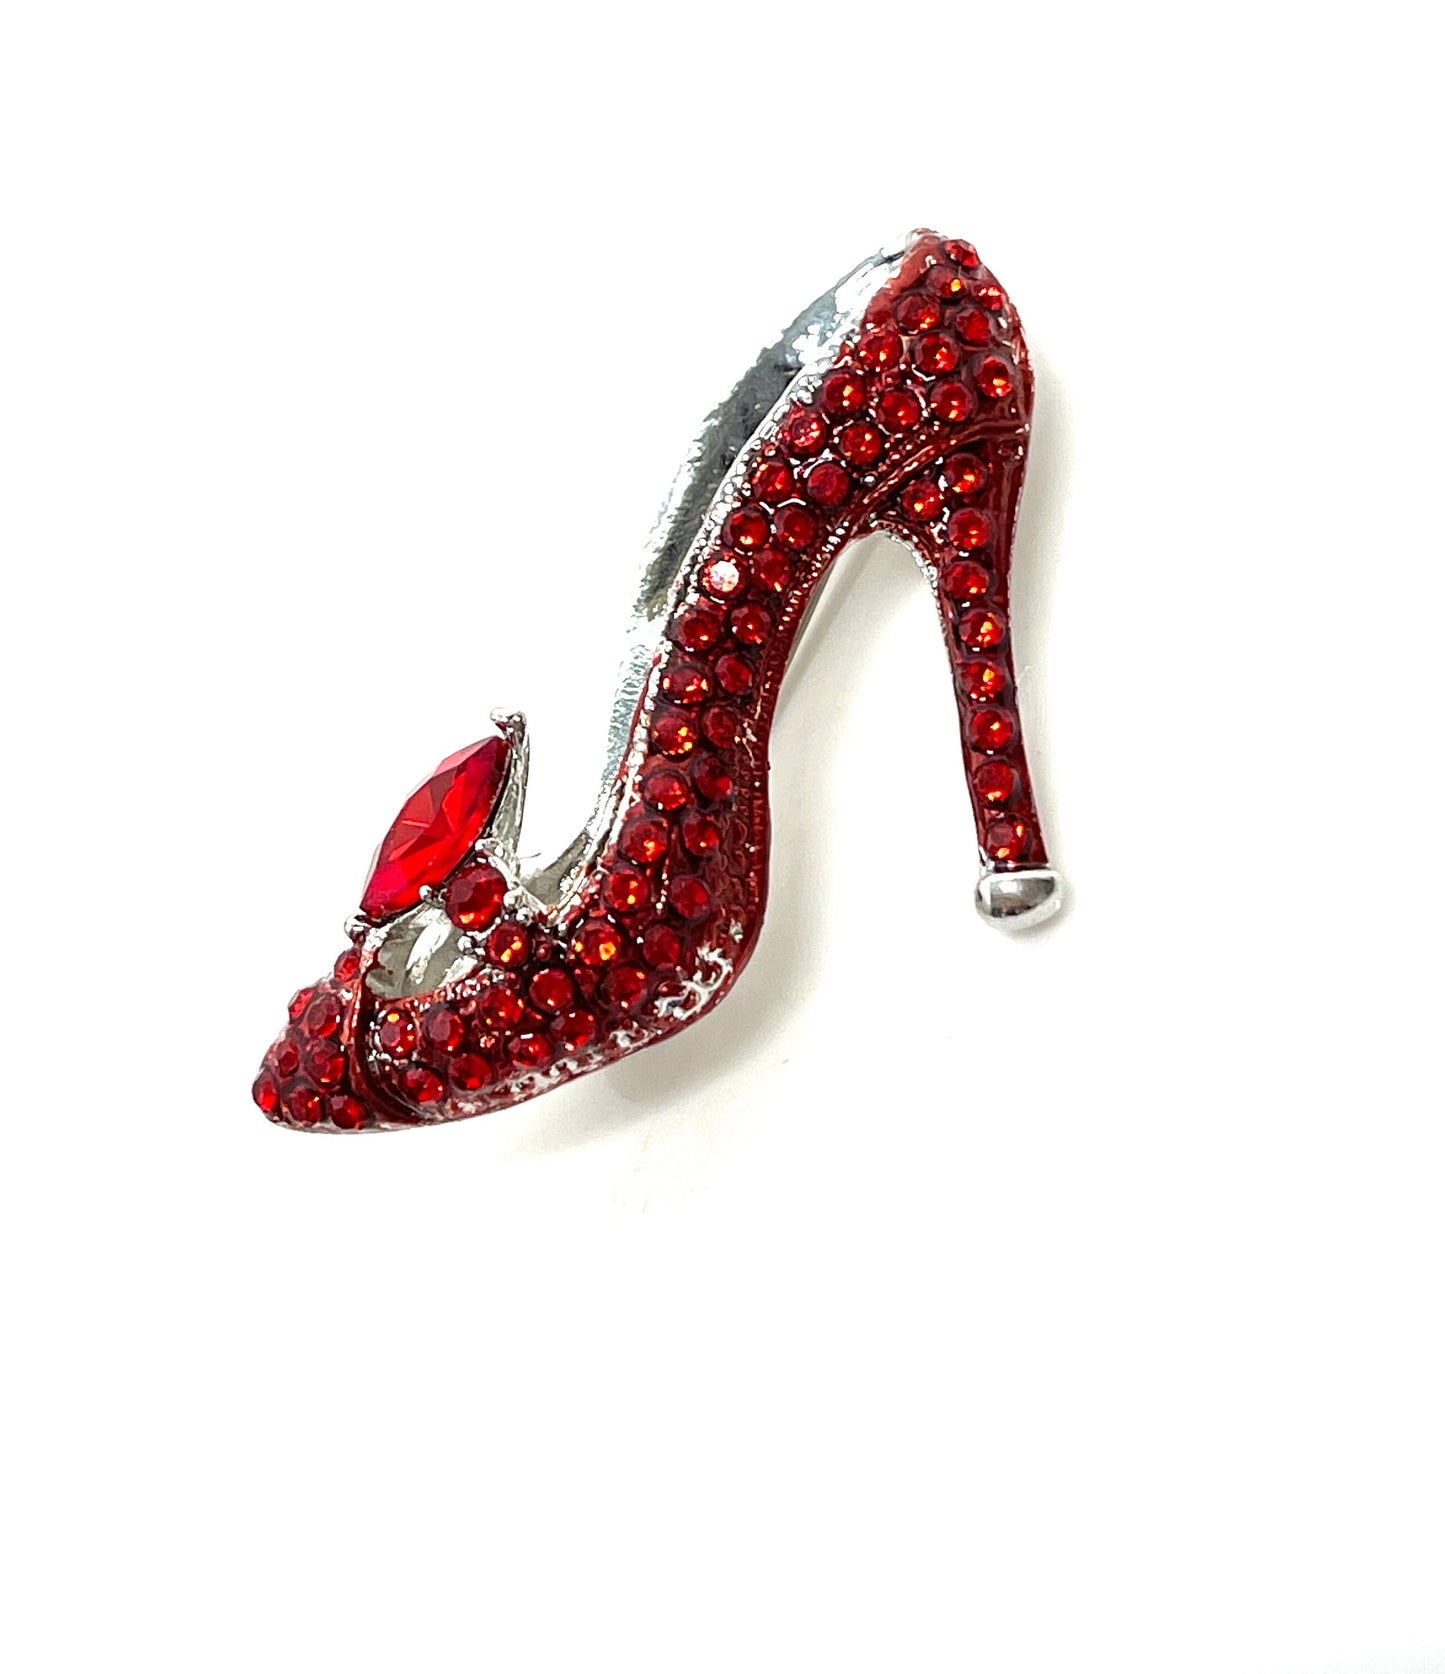 Beautiful Red Stiletto Shoe Brooch, Ruby Crystal Shoe, Sparkly Fashion Accessory Pin, Stylish High Heel Pin, Brooches for Women